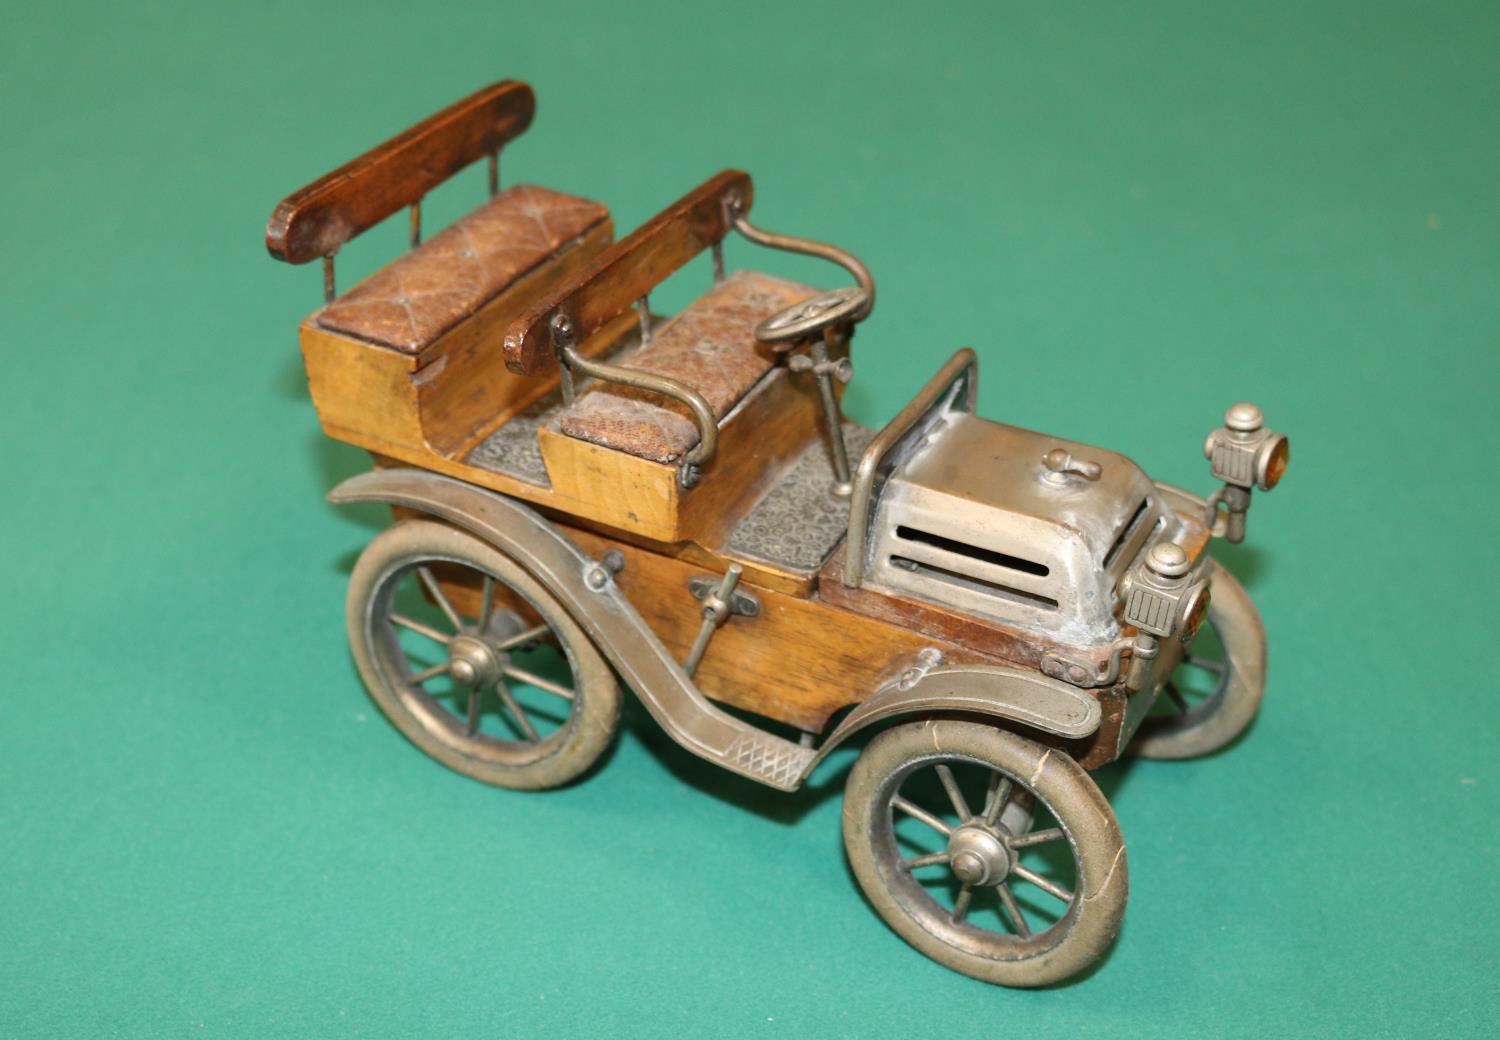 A rare Earnst Plank German Desk Display car for holding Cigarettes and matches, possibly dating from - Image 2 of 4